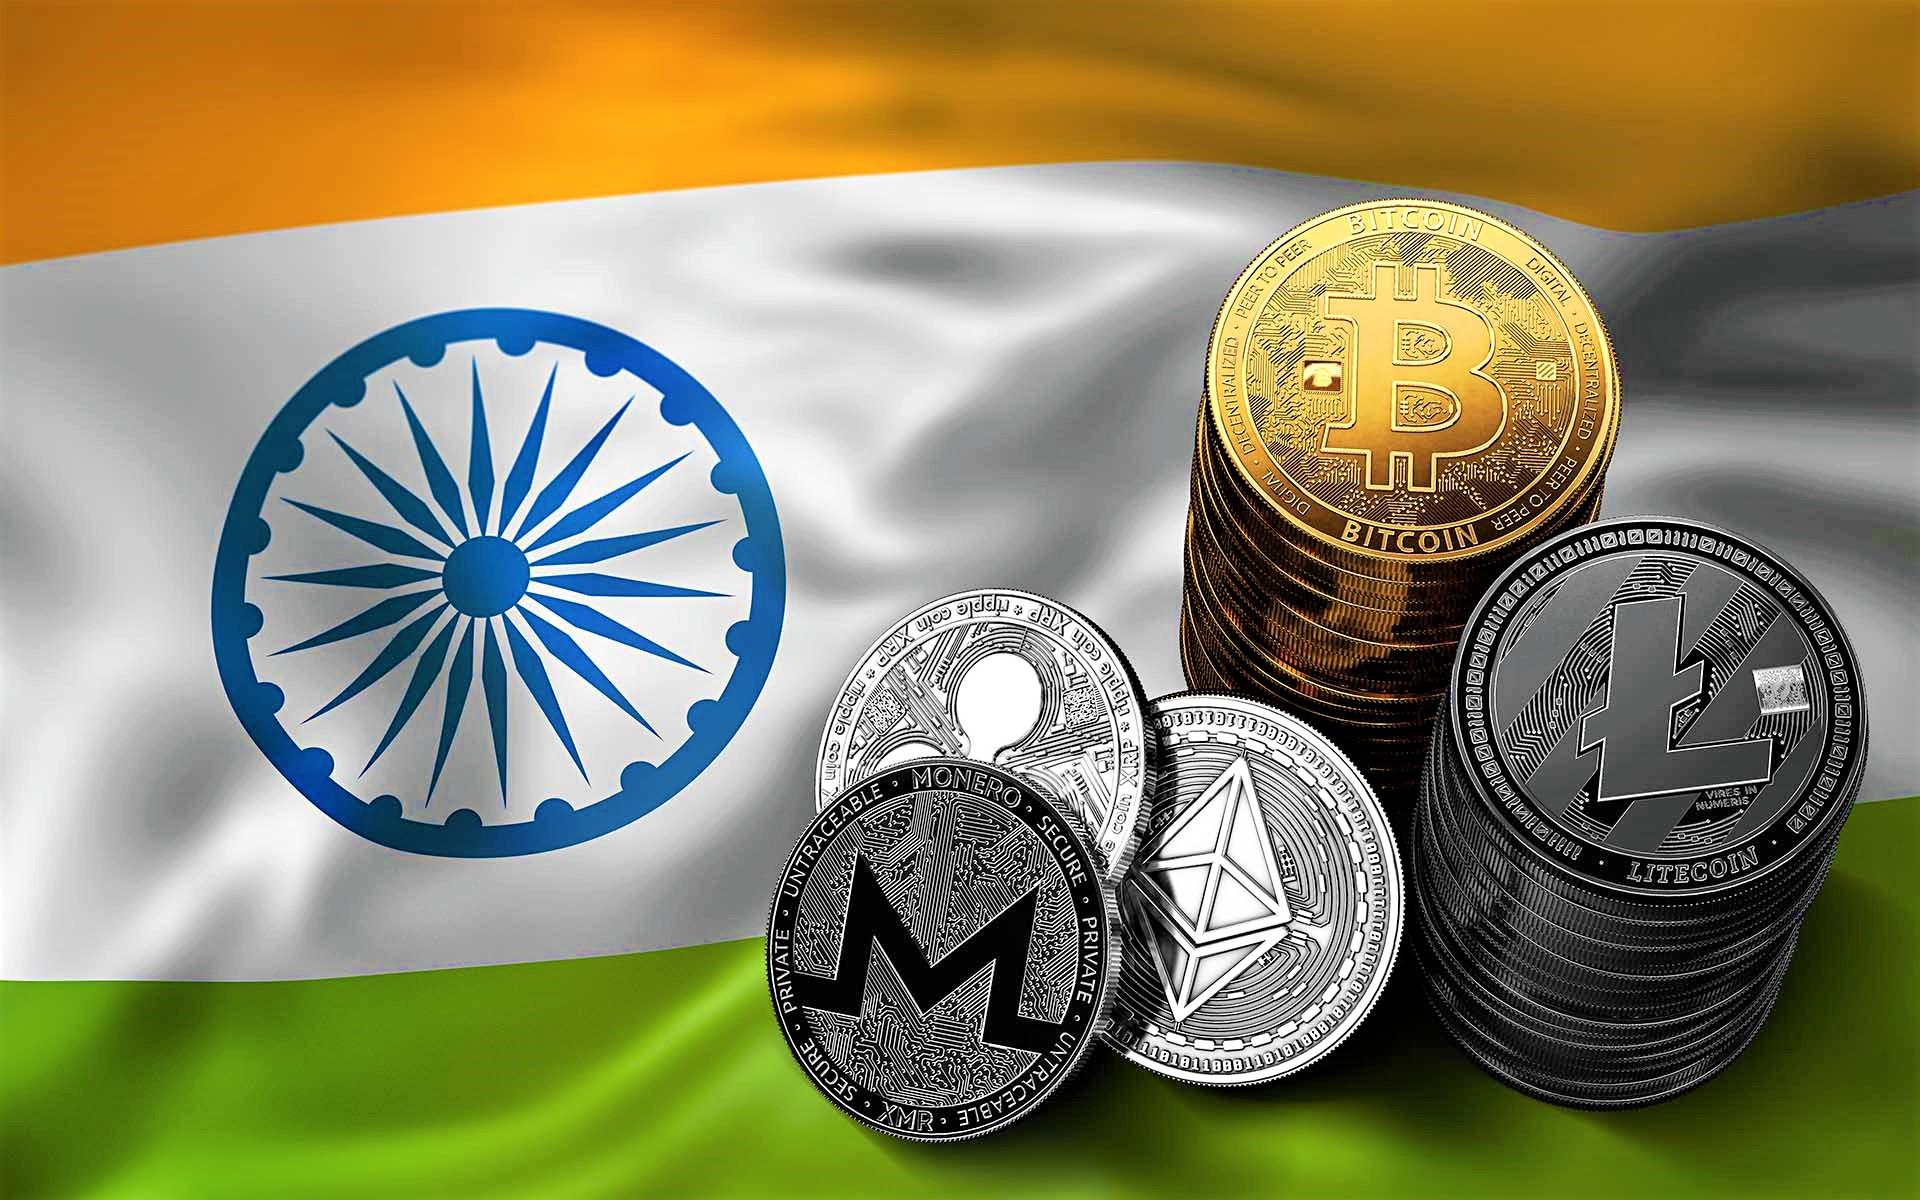 India Expects a “Calibrated Position” - Crypto Ban Was a FUD